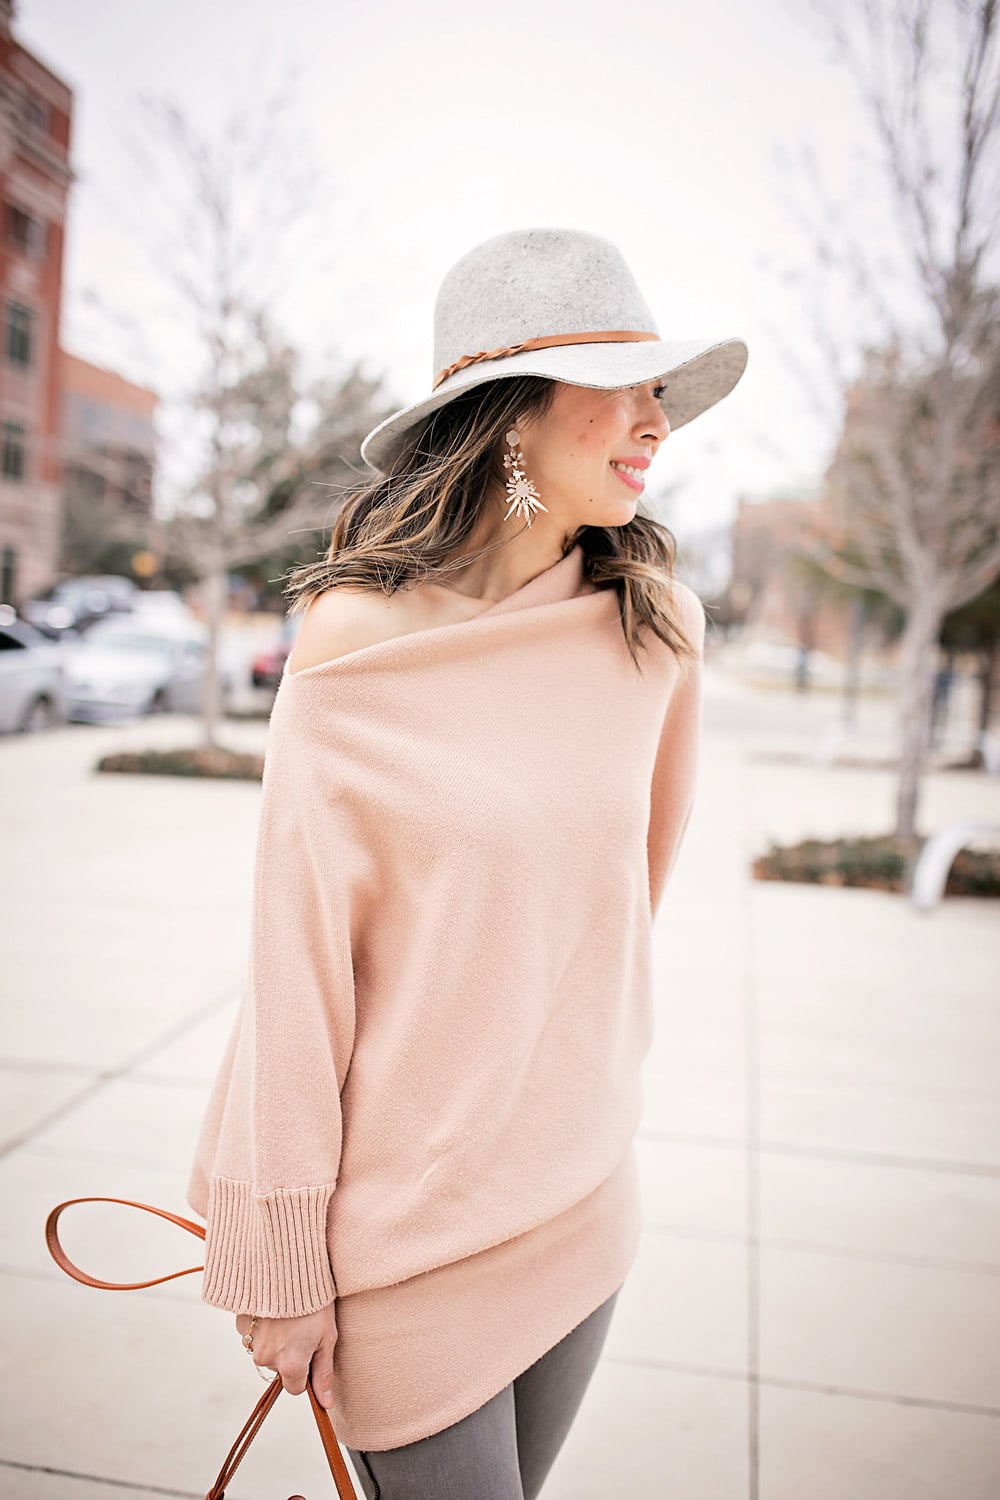 tan off the shoulder sweater with frame le skinny grey jeans, kendra scott isadora earrings, grey fedora